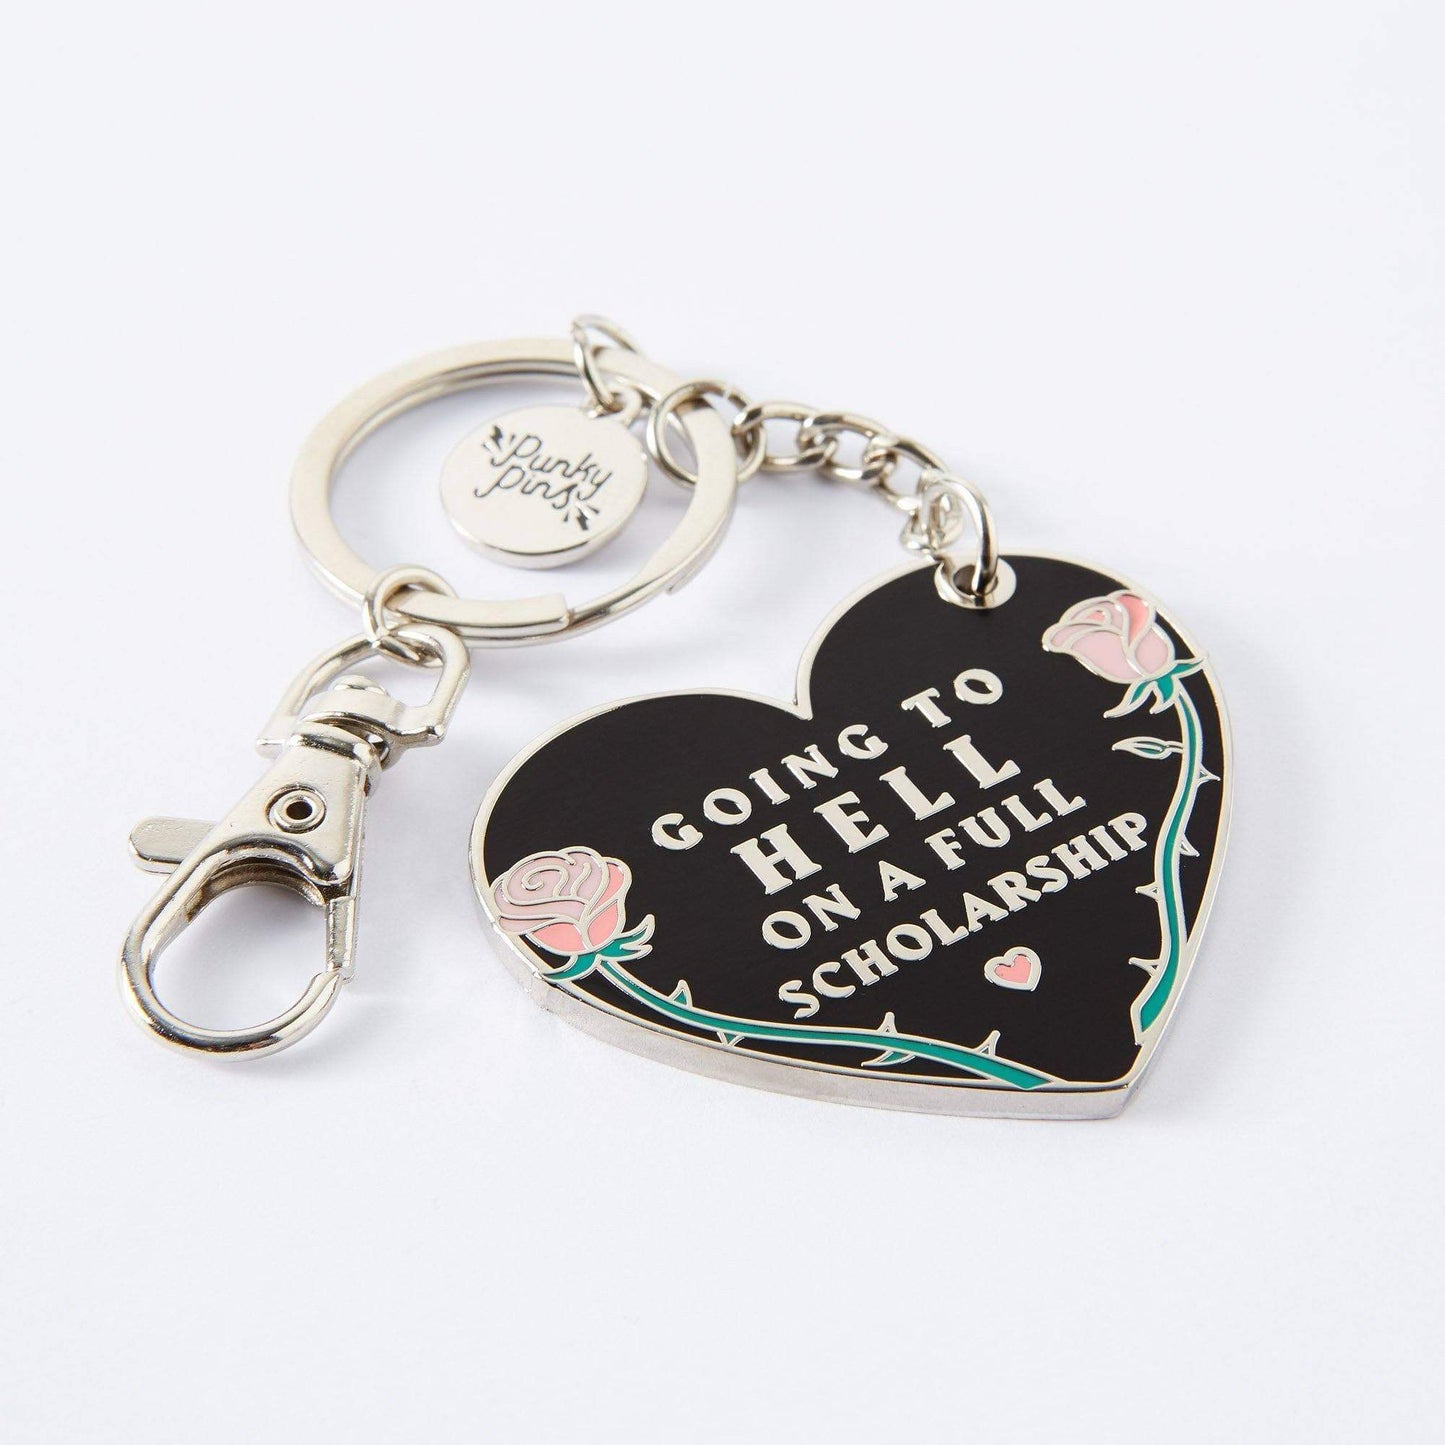 Going to Hell On A Full Scholarship Enamel Keychain